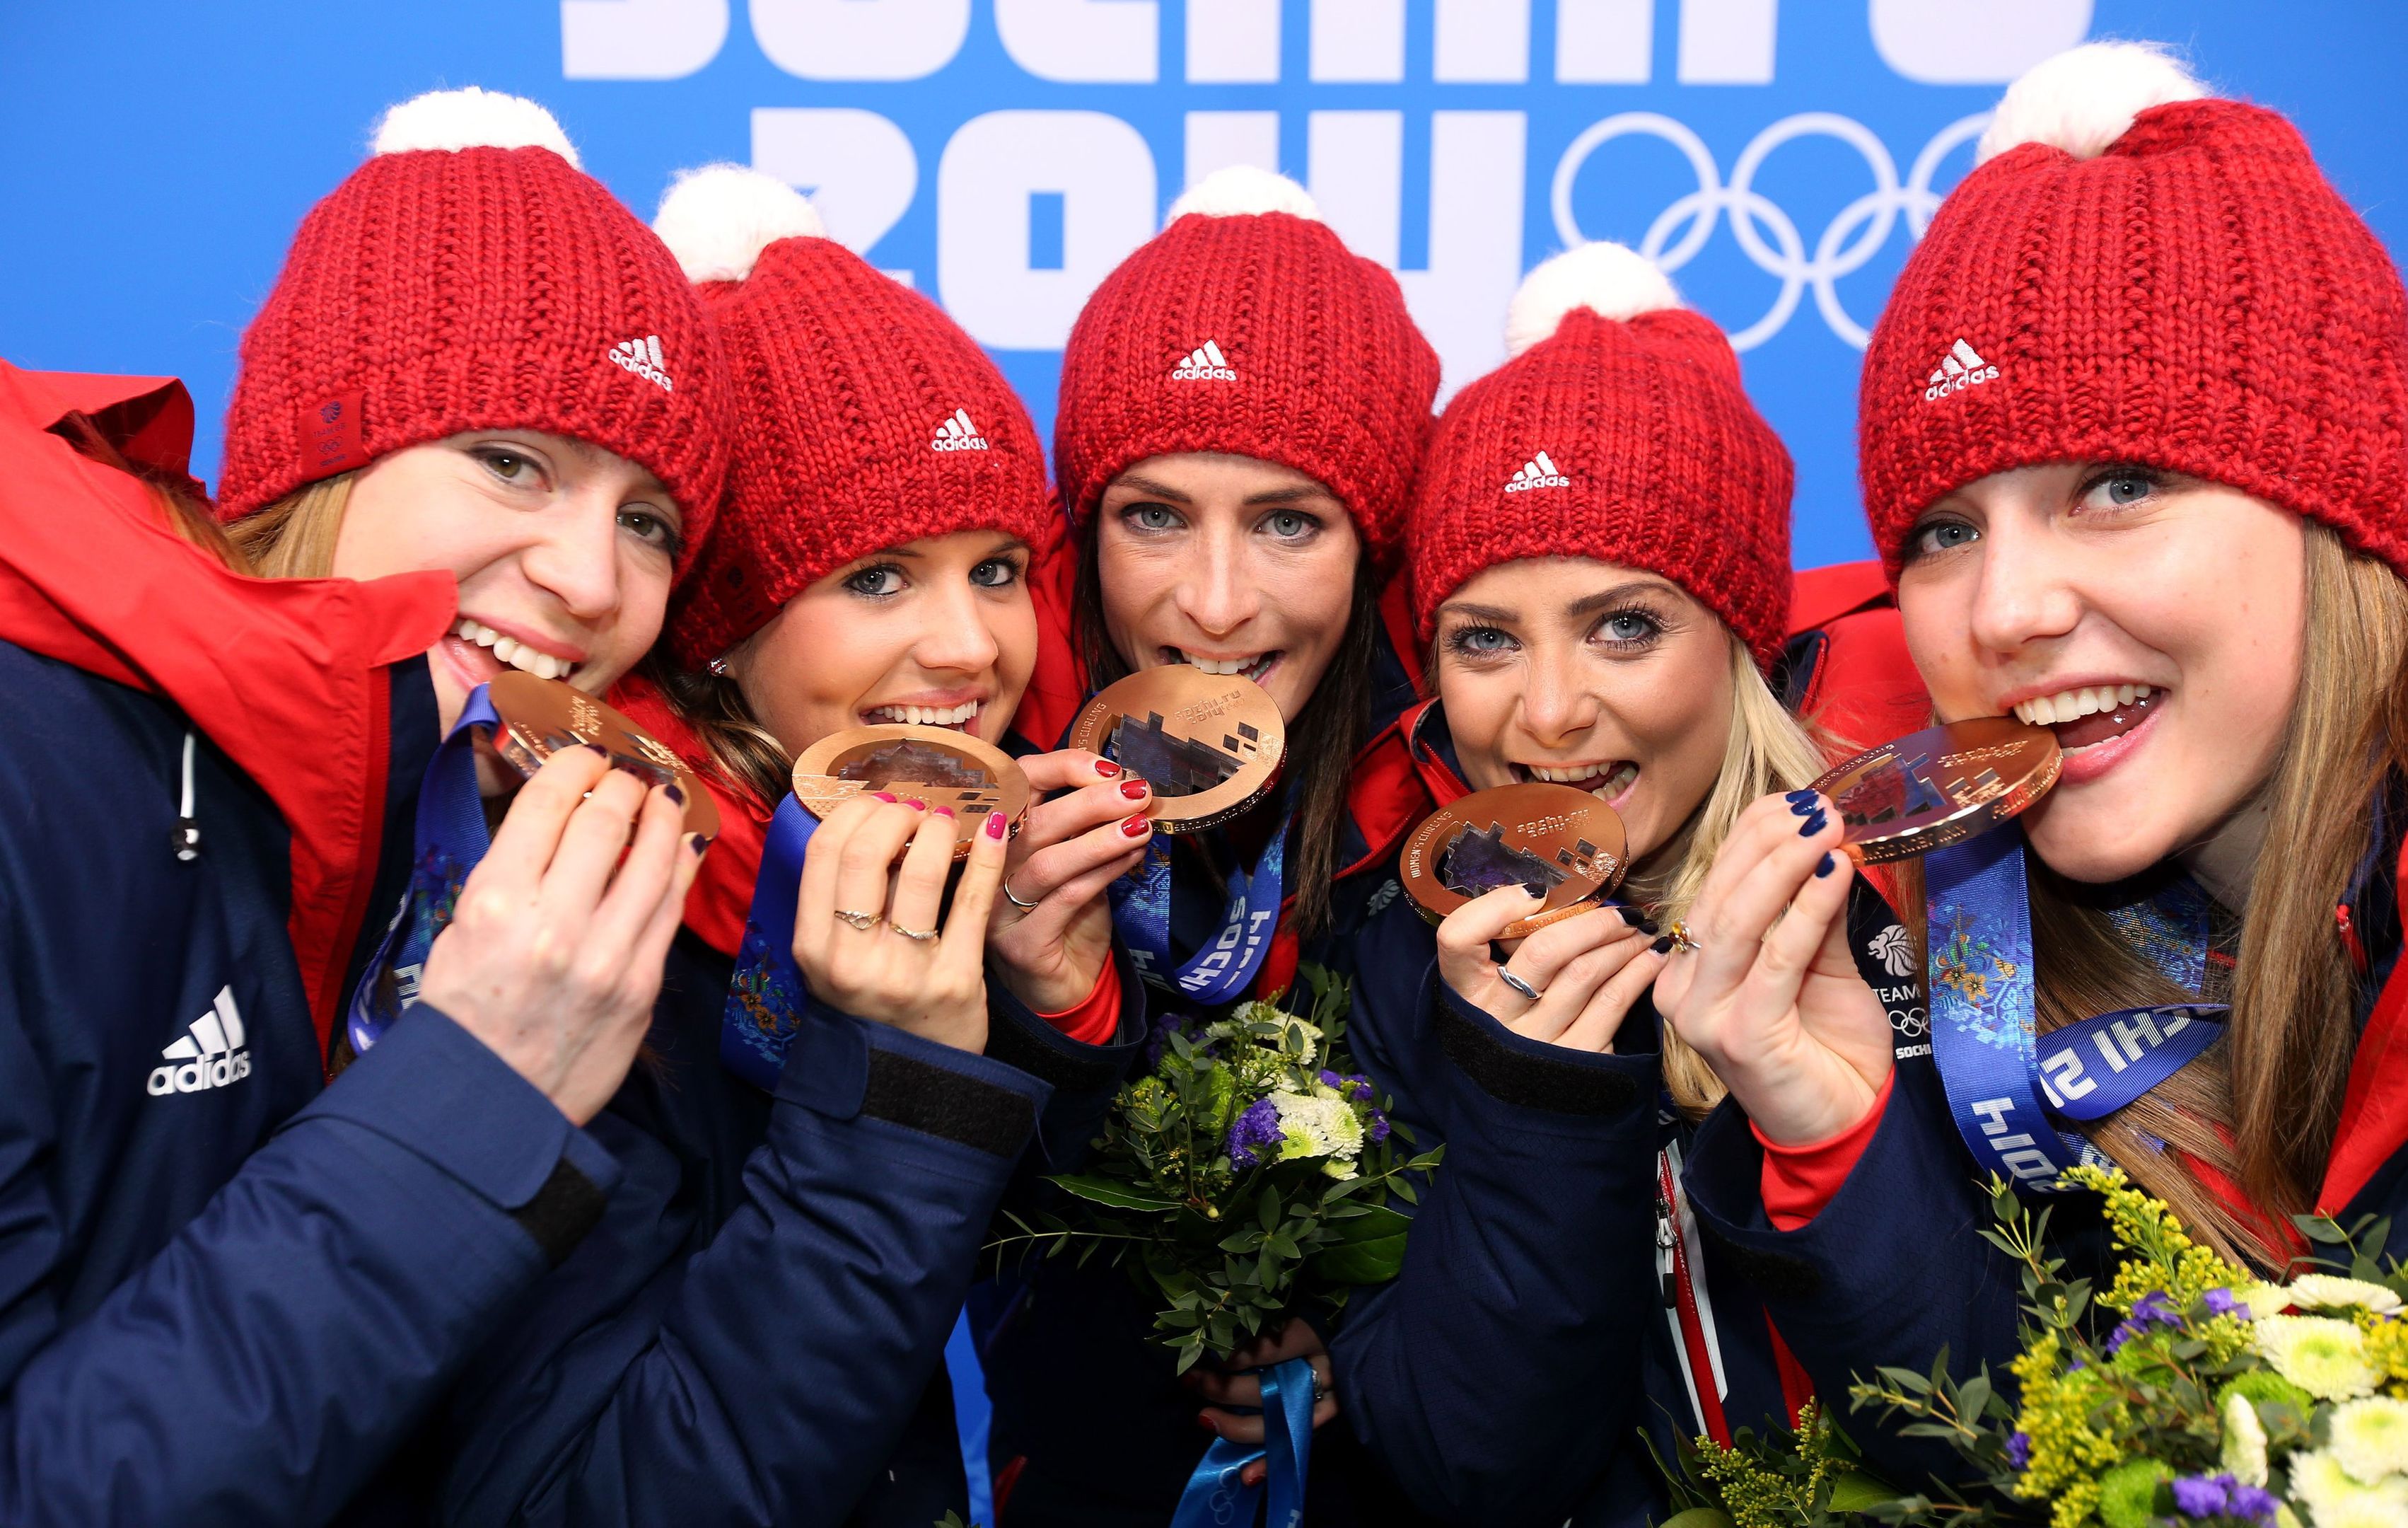 Great Britain's Women's curling team (left to right) Claire Hamilton, Vicki Adams, Eve Muirhead, Anna Sloan and Lauren Gray with their Bronze medals (Andrew Milligan/PA)